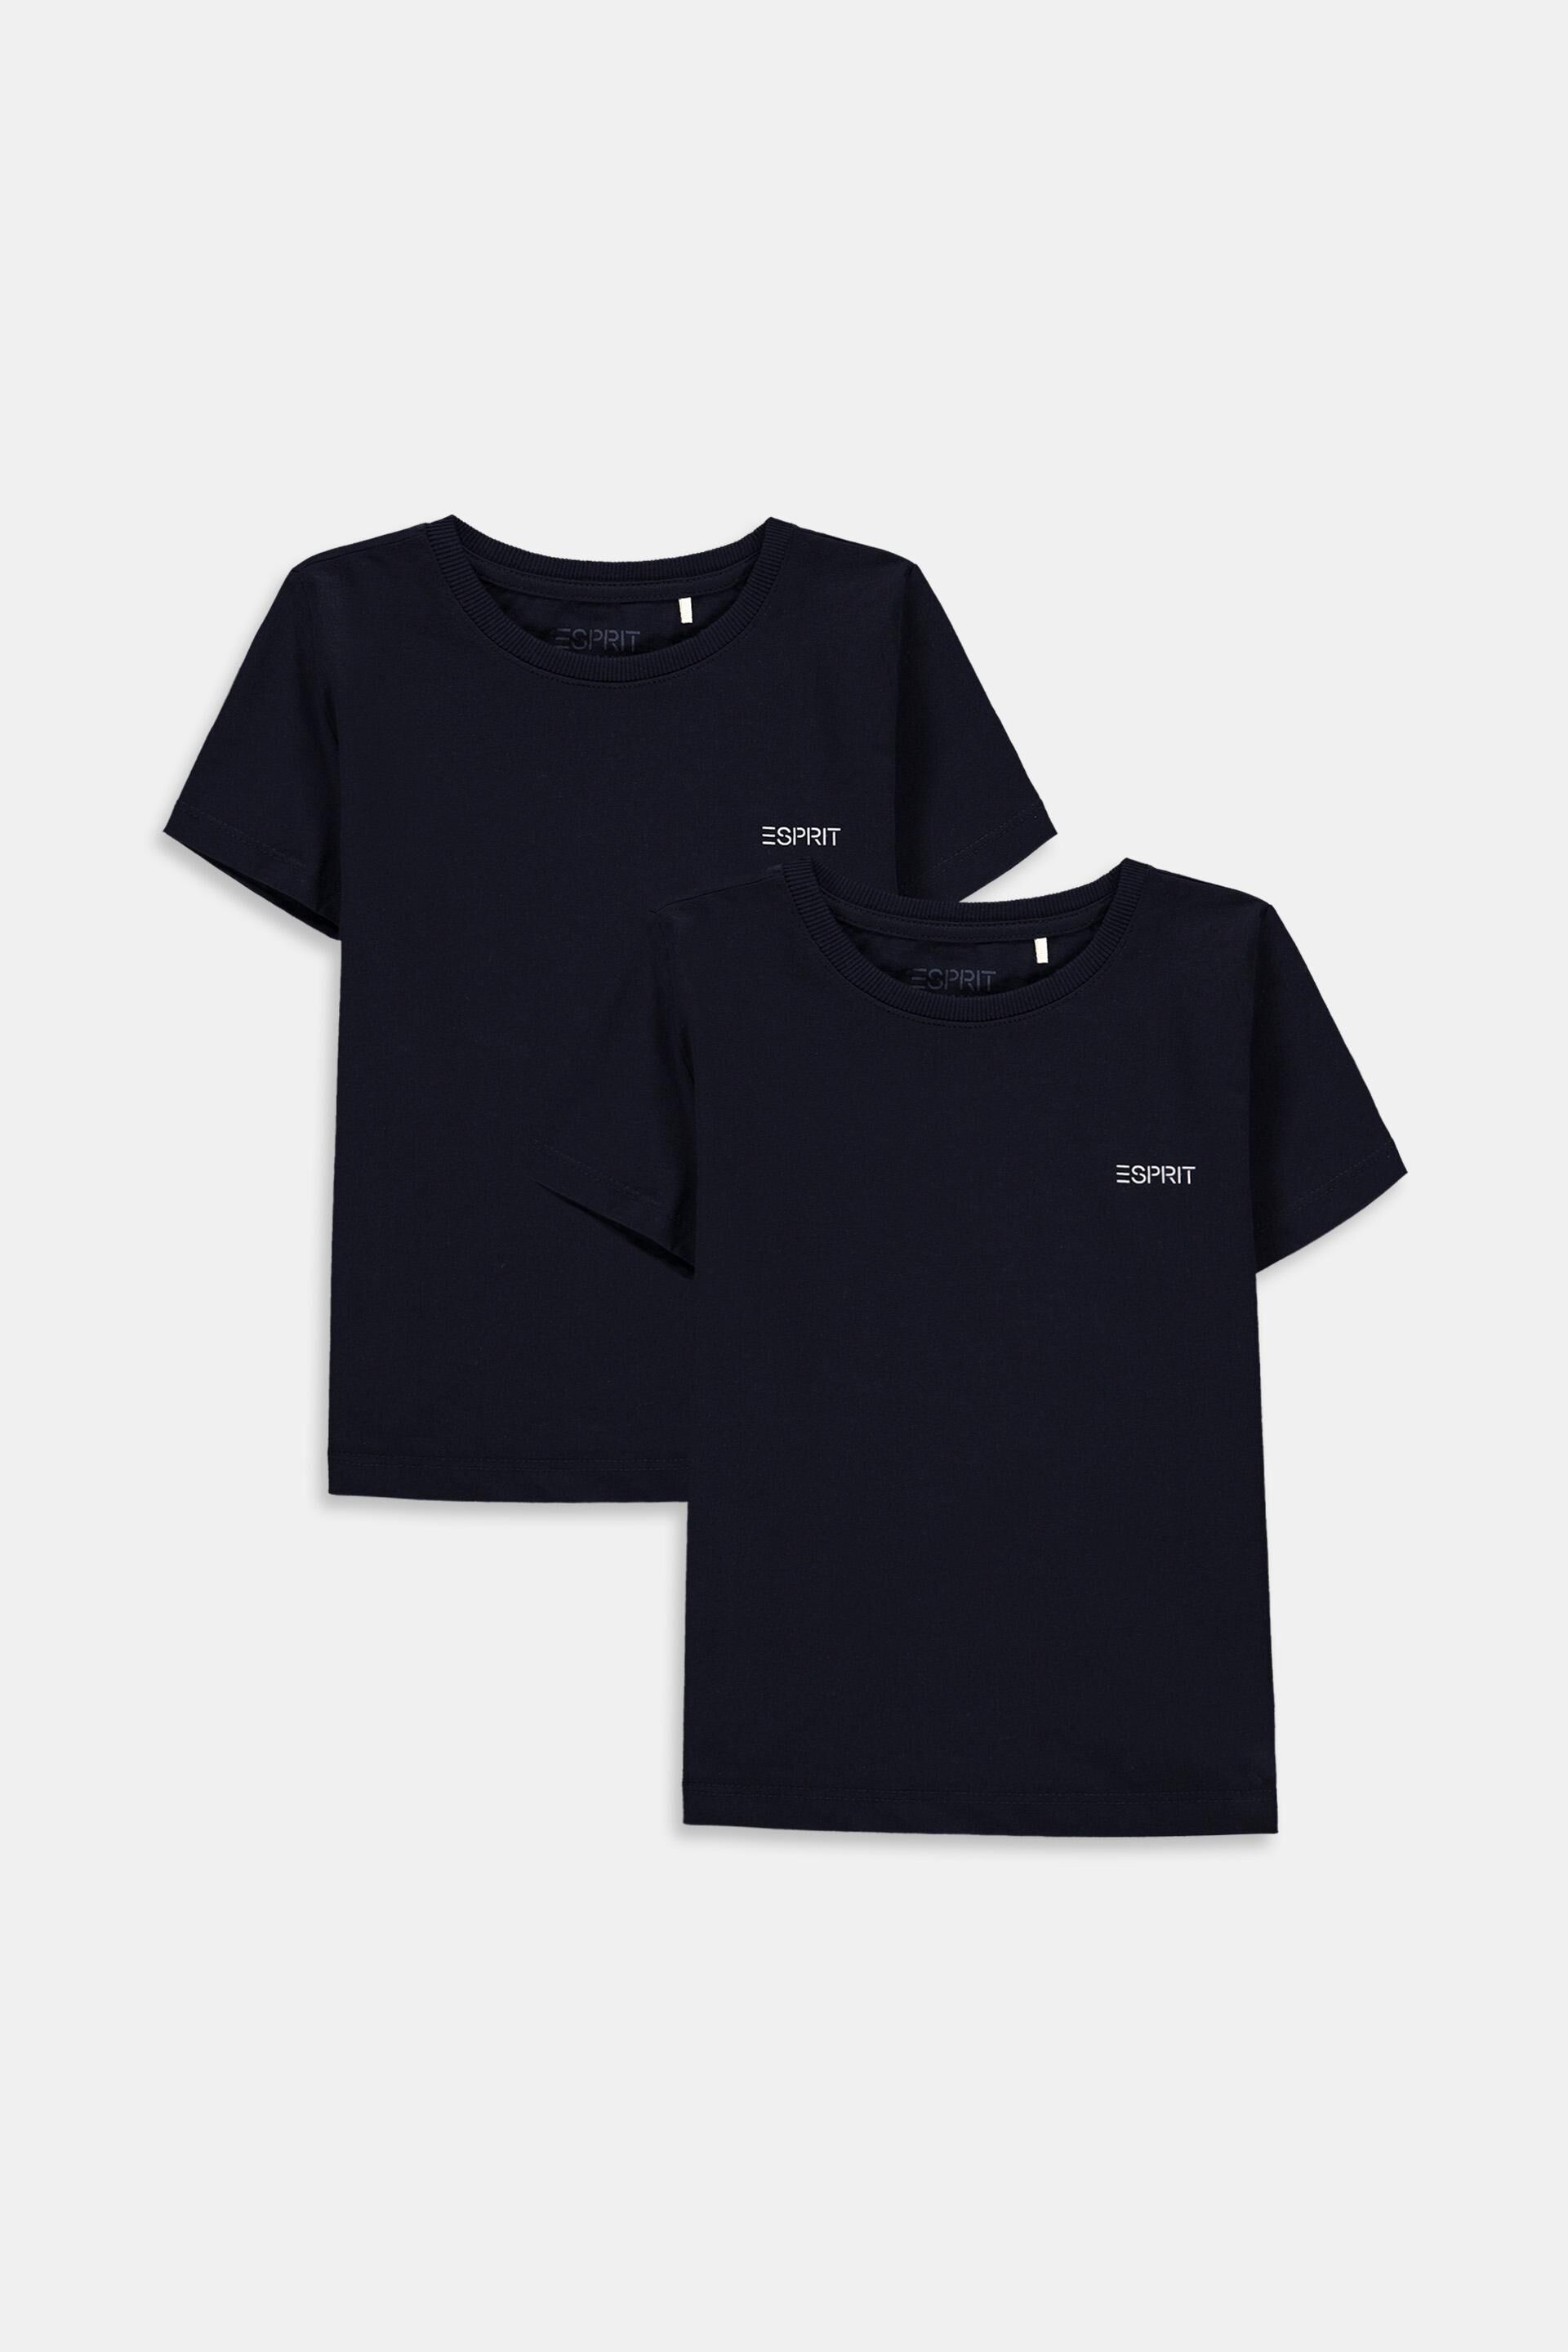 Esprit cotton T-shirts made pack 100% Double of